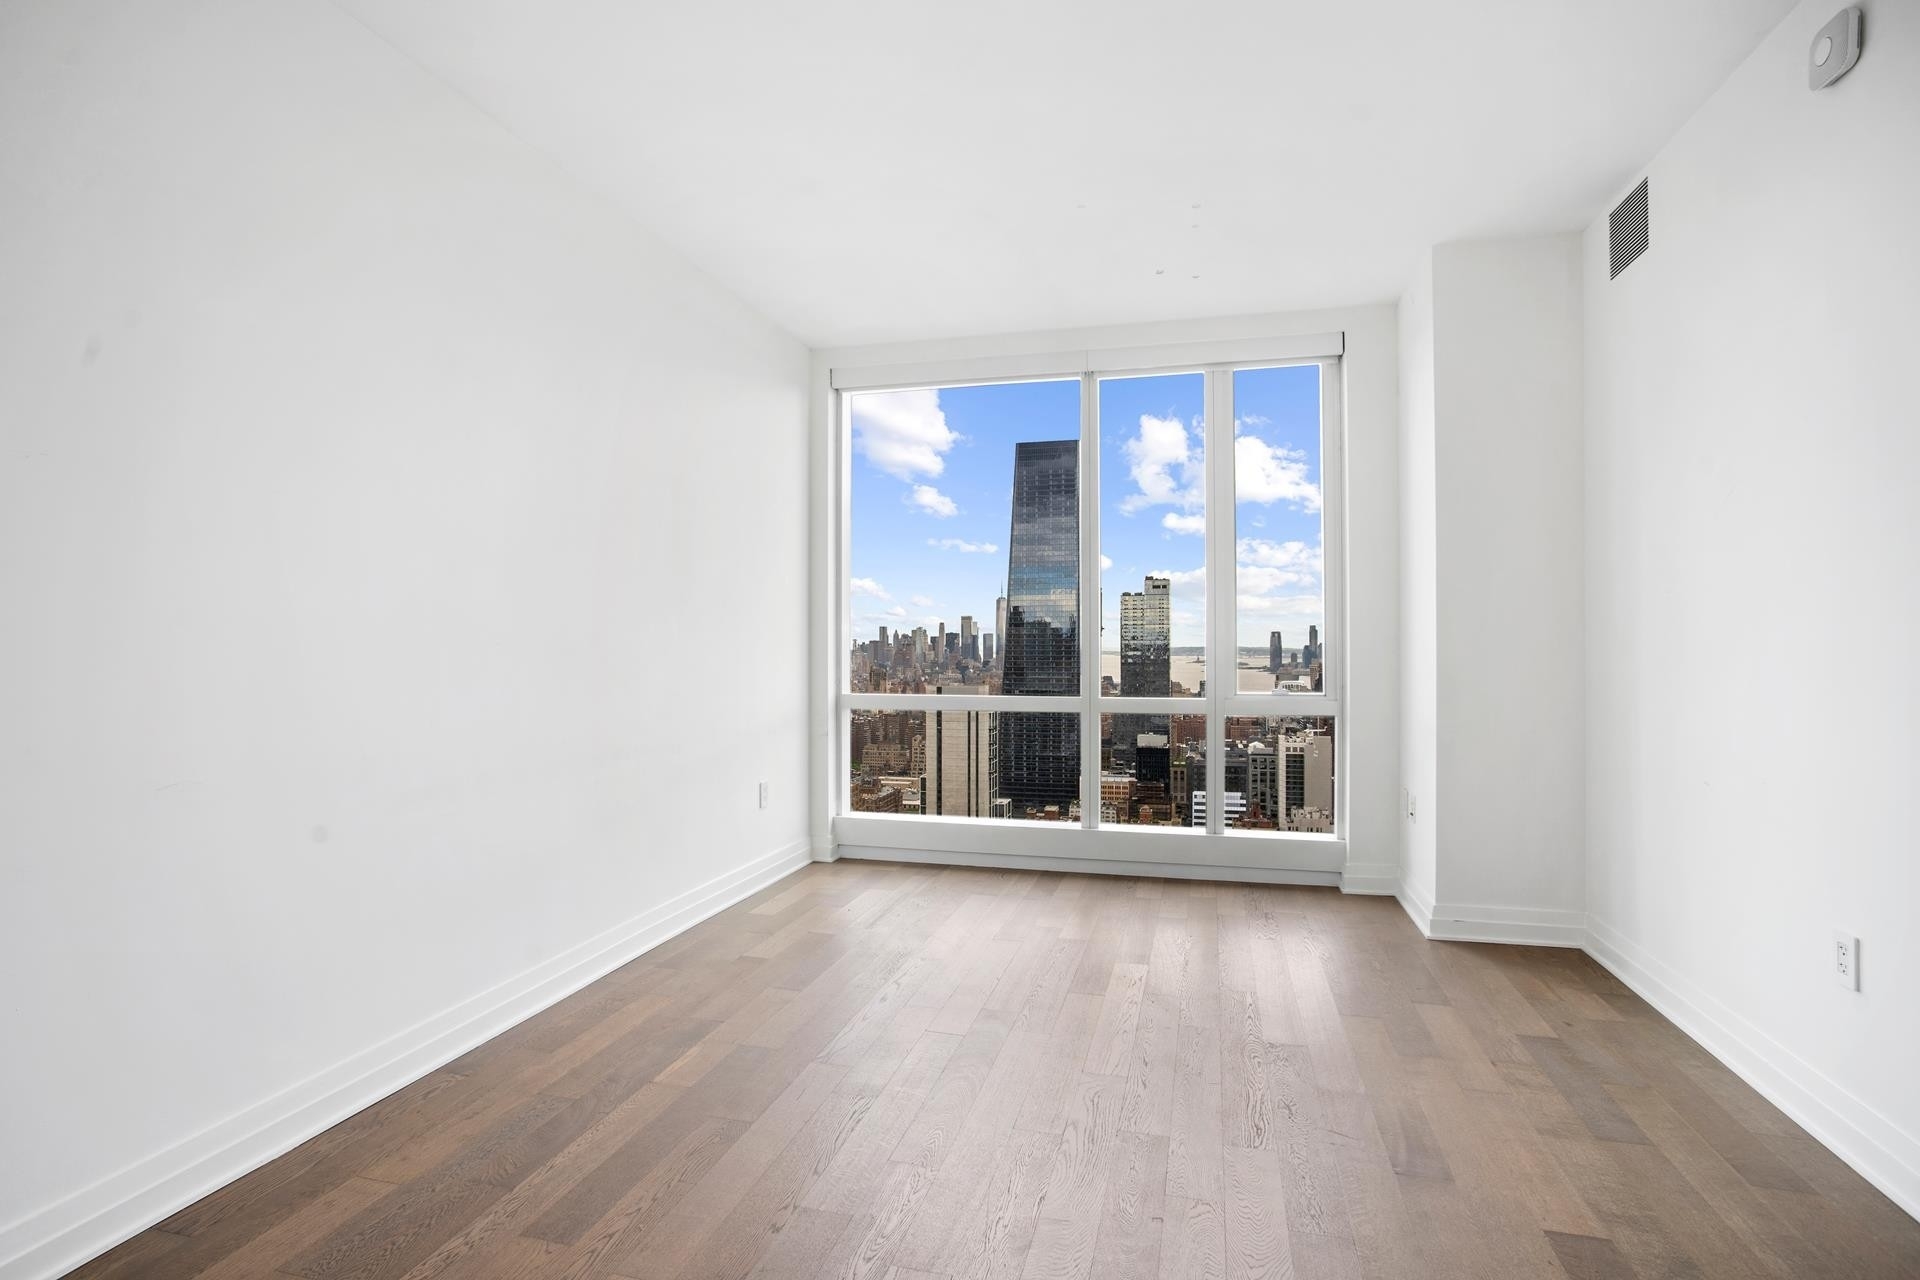 Condominium for Sale at Mima, 460 W 42ND ST, 55H Hudson Yards, New York, NY 10036